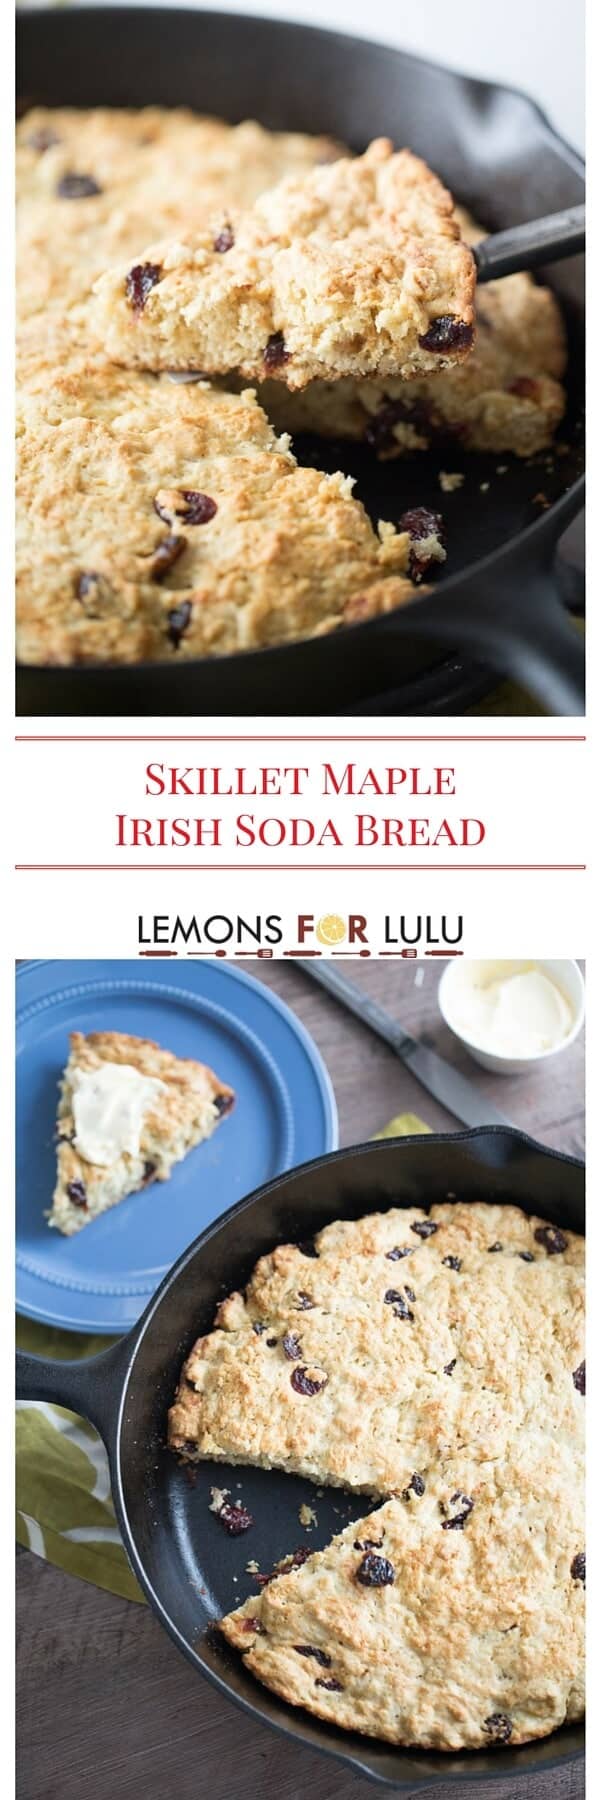 An easy Irish soda bread recipe made sweet with pure maple syrup and dried cherries. This bread recipe is quick and easy and is perfect for breakfast, on the side or as an afternoon snack!